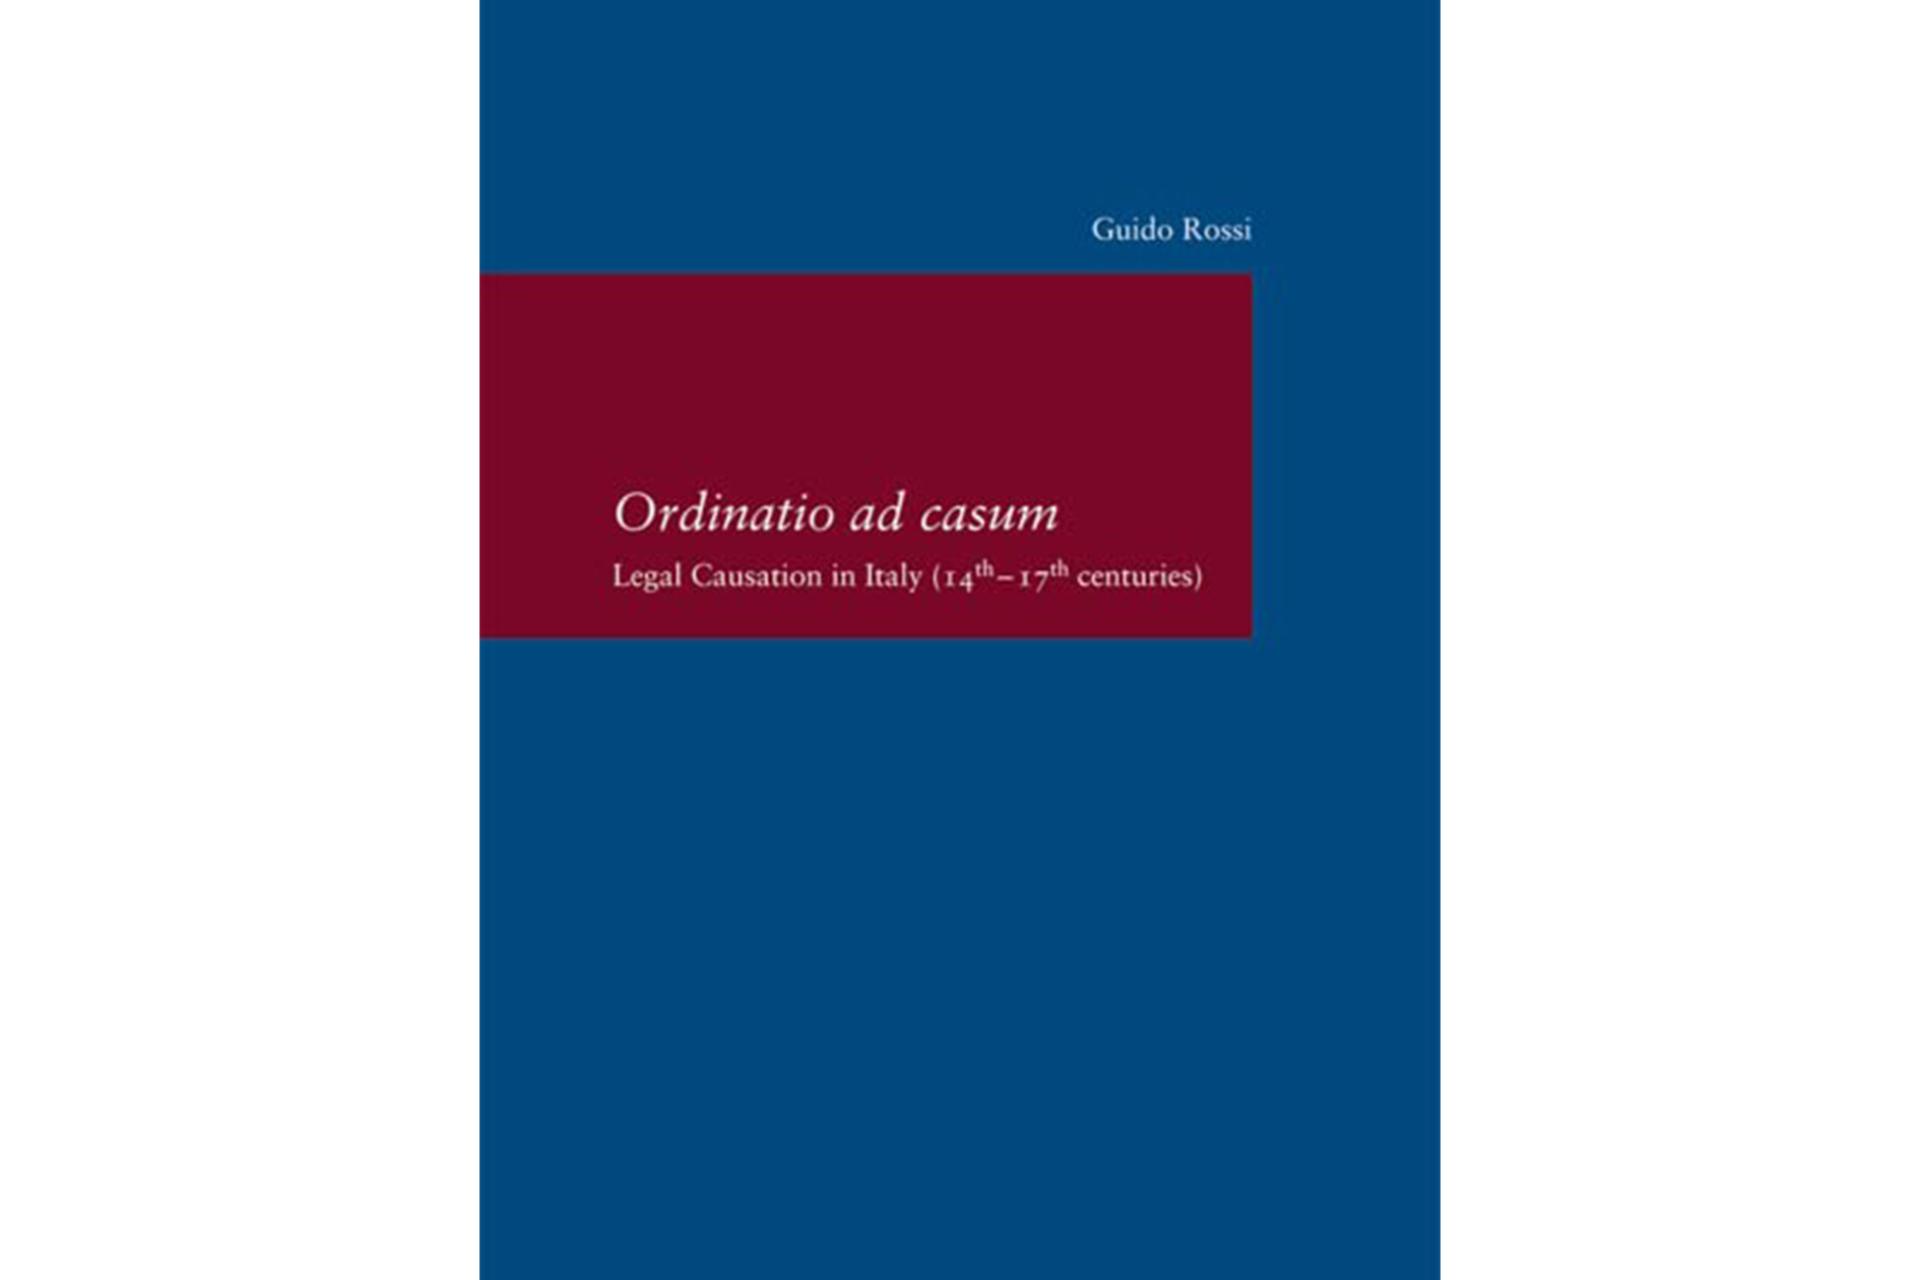 Ordinatio ad Casum. Legal Causation in Italy (14th-17th Centuries) by Guido Rosso Book Cover